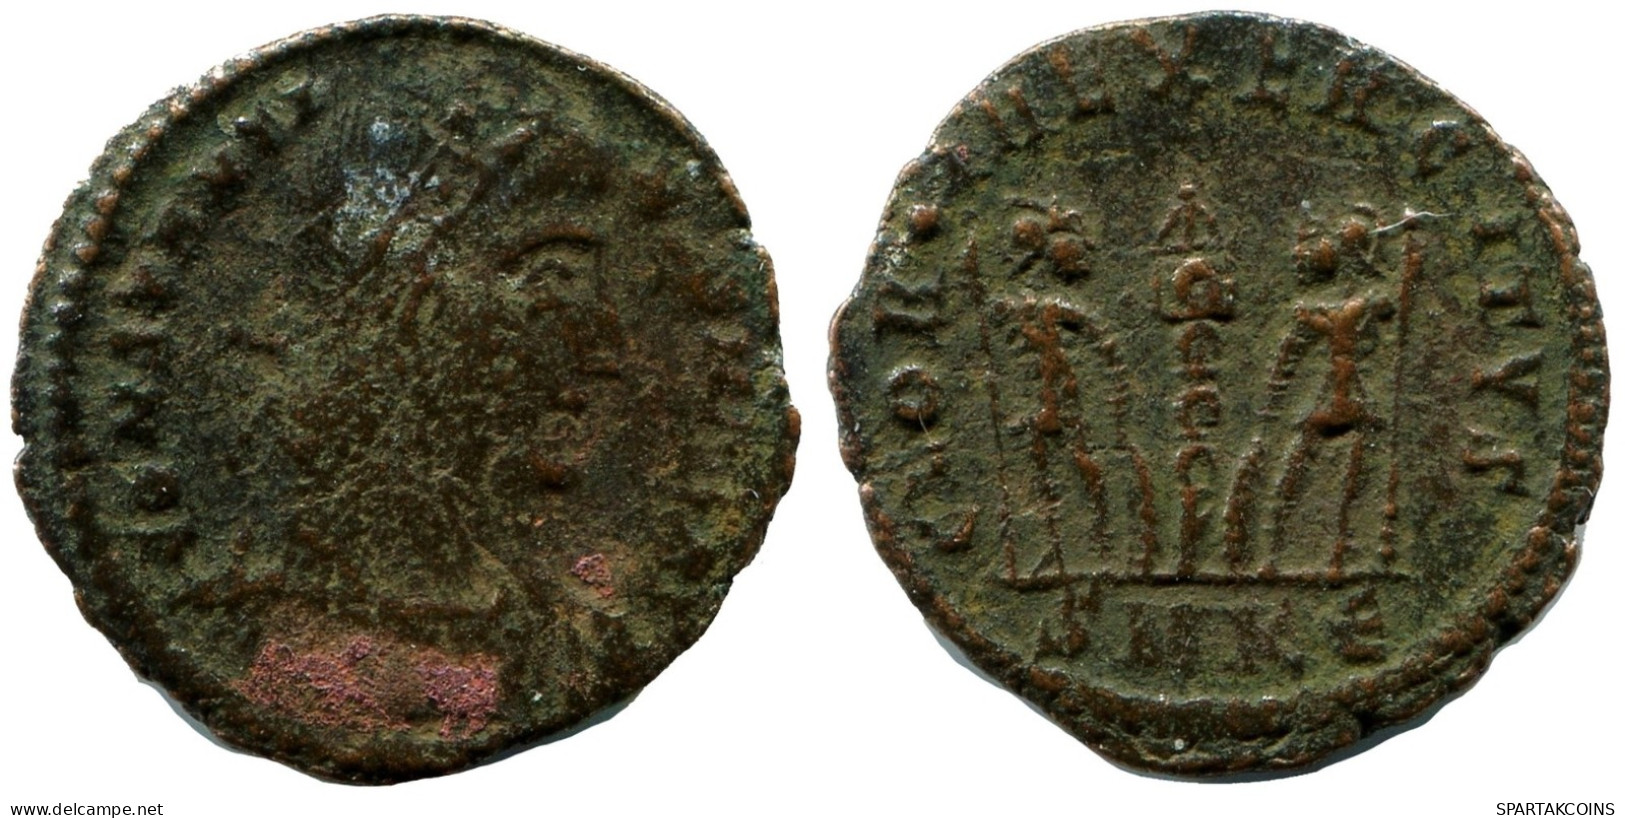 CONSTANTINE I MINTED IN CYZICUS FOUND IN IHNASYAH HOARD EGYPT #ANC10991.14.U.A - The Christian Empire (307 AD To 363 AD)